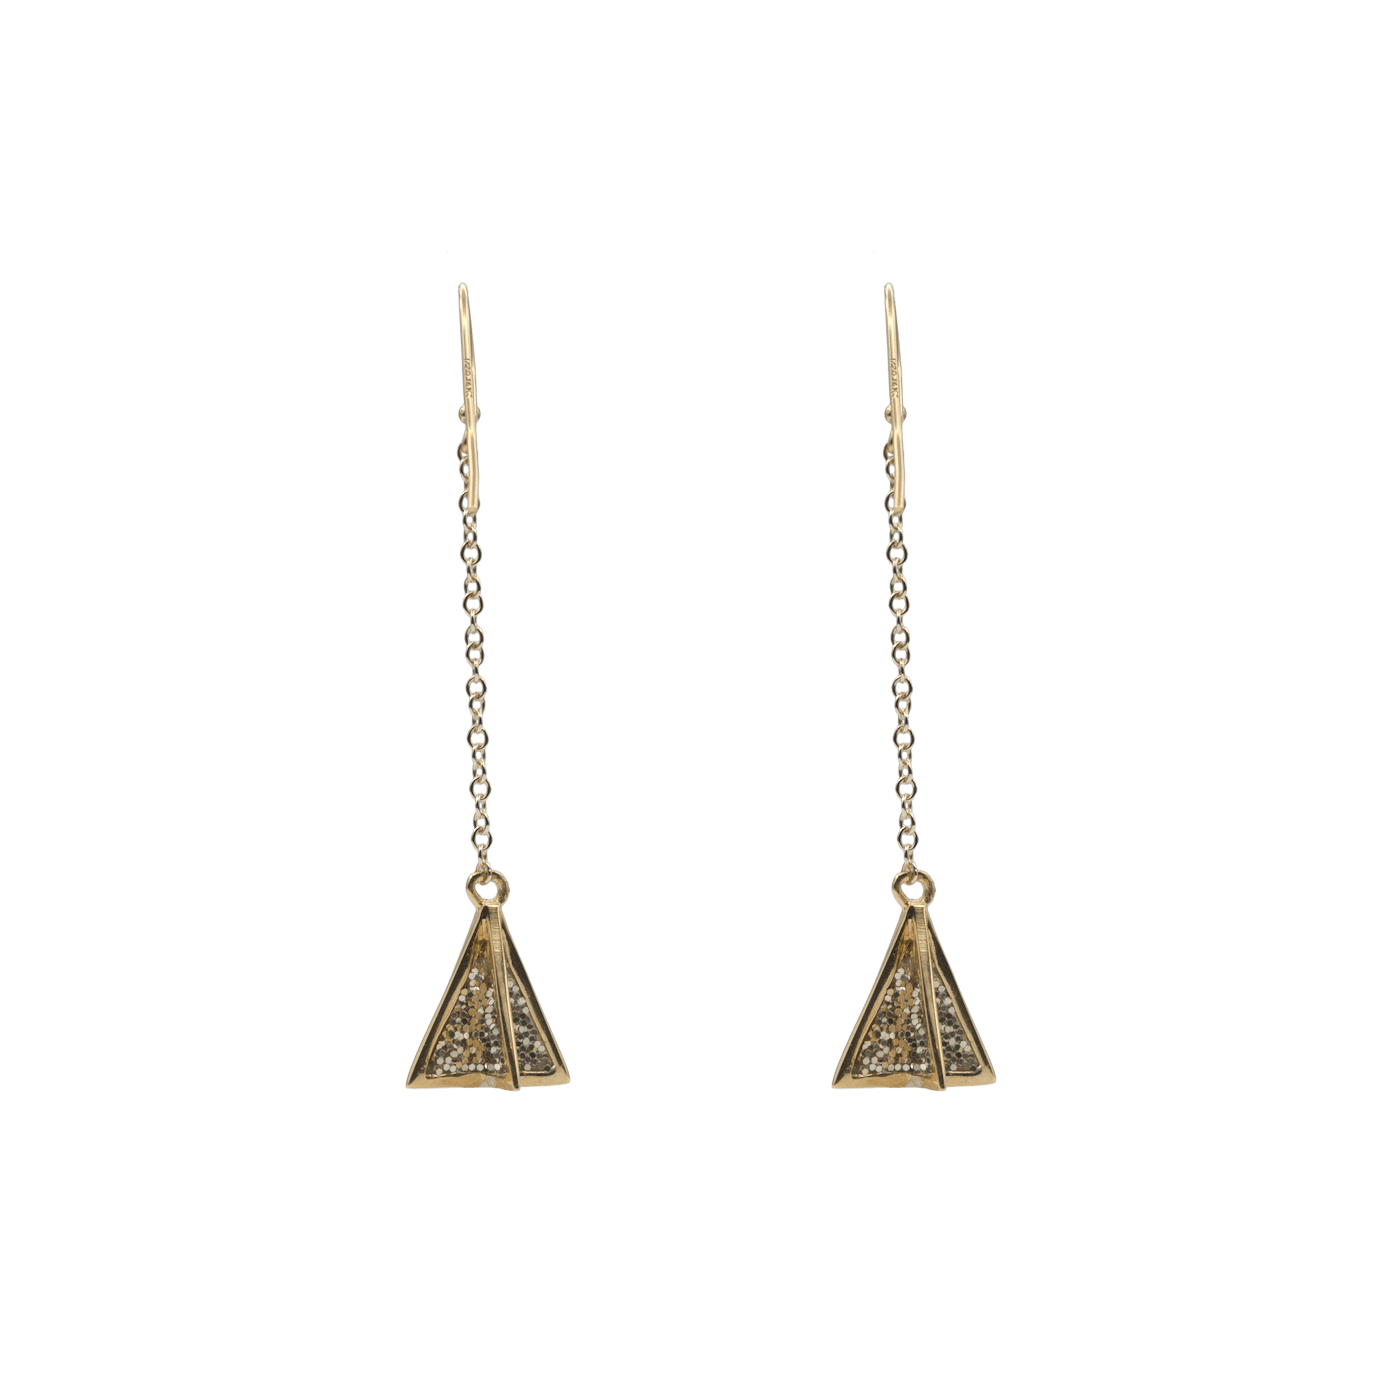 double sided enameled gold dangling pyramid earrings with gold glitter